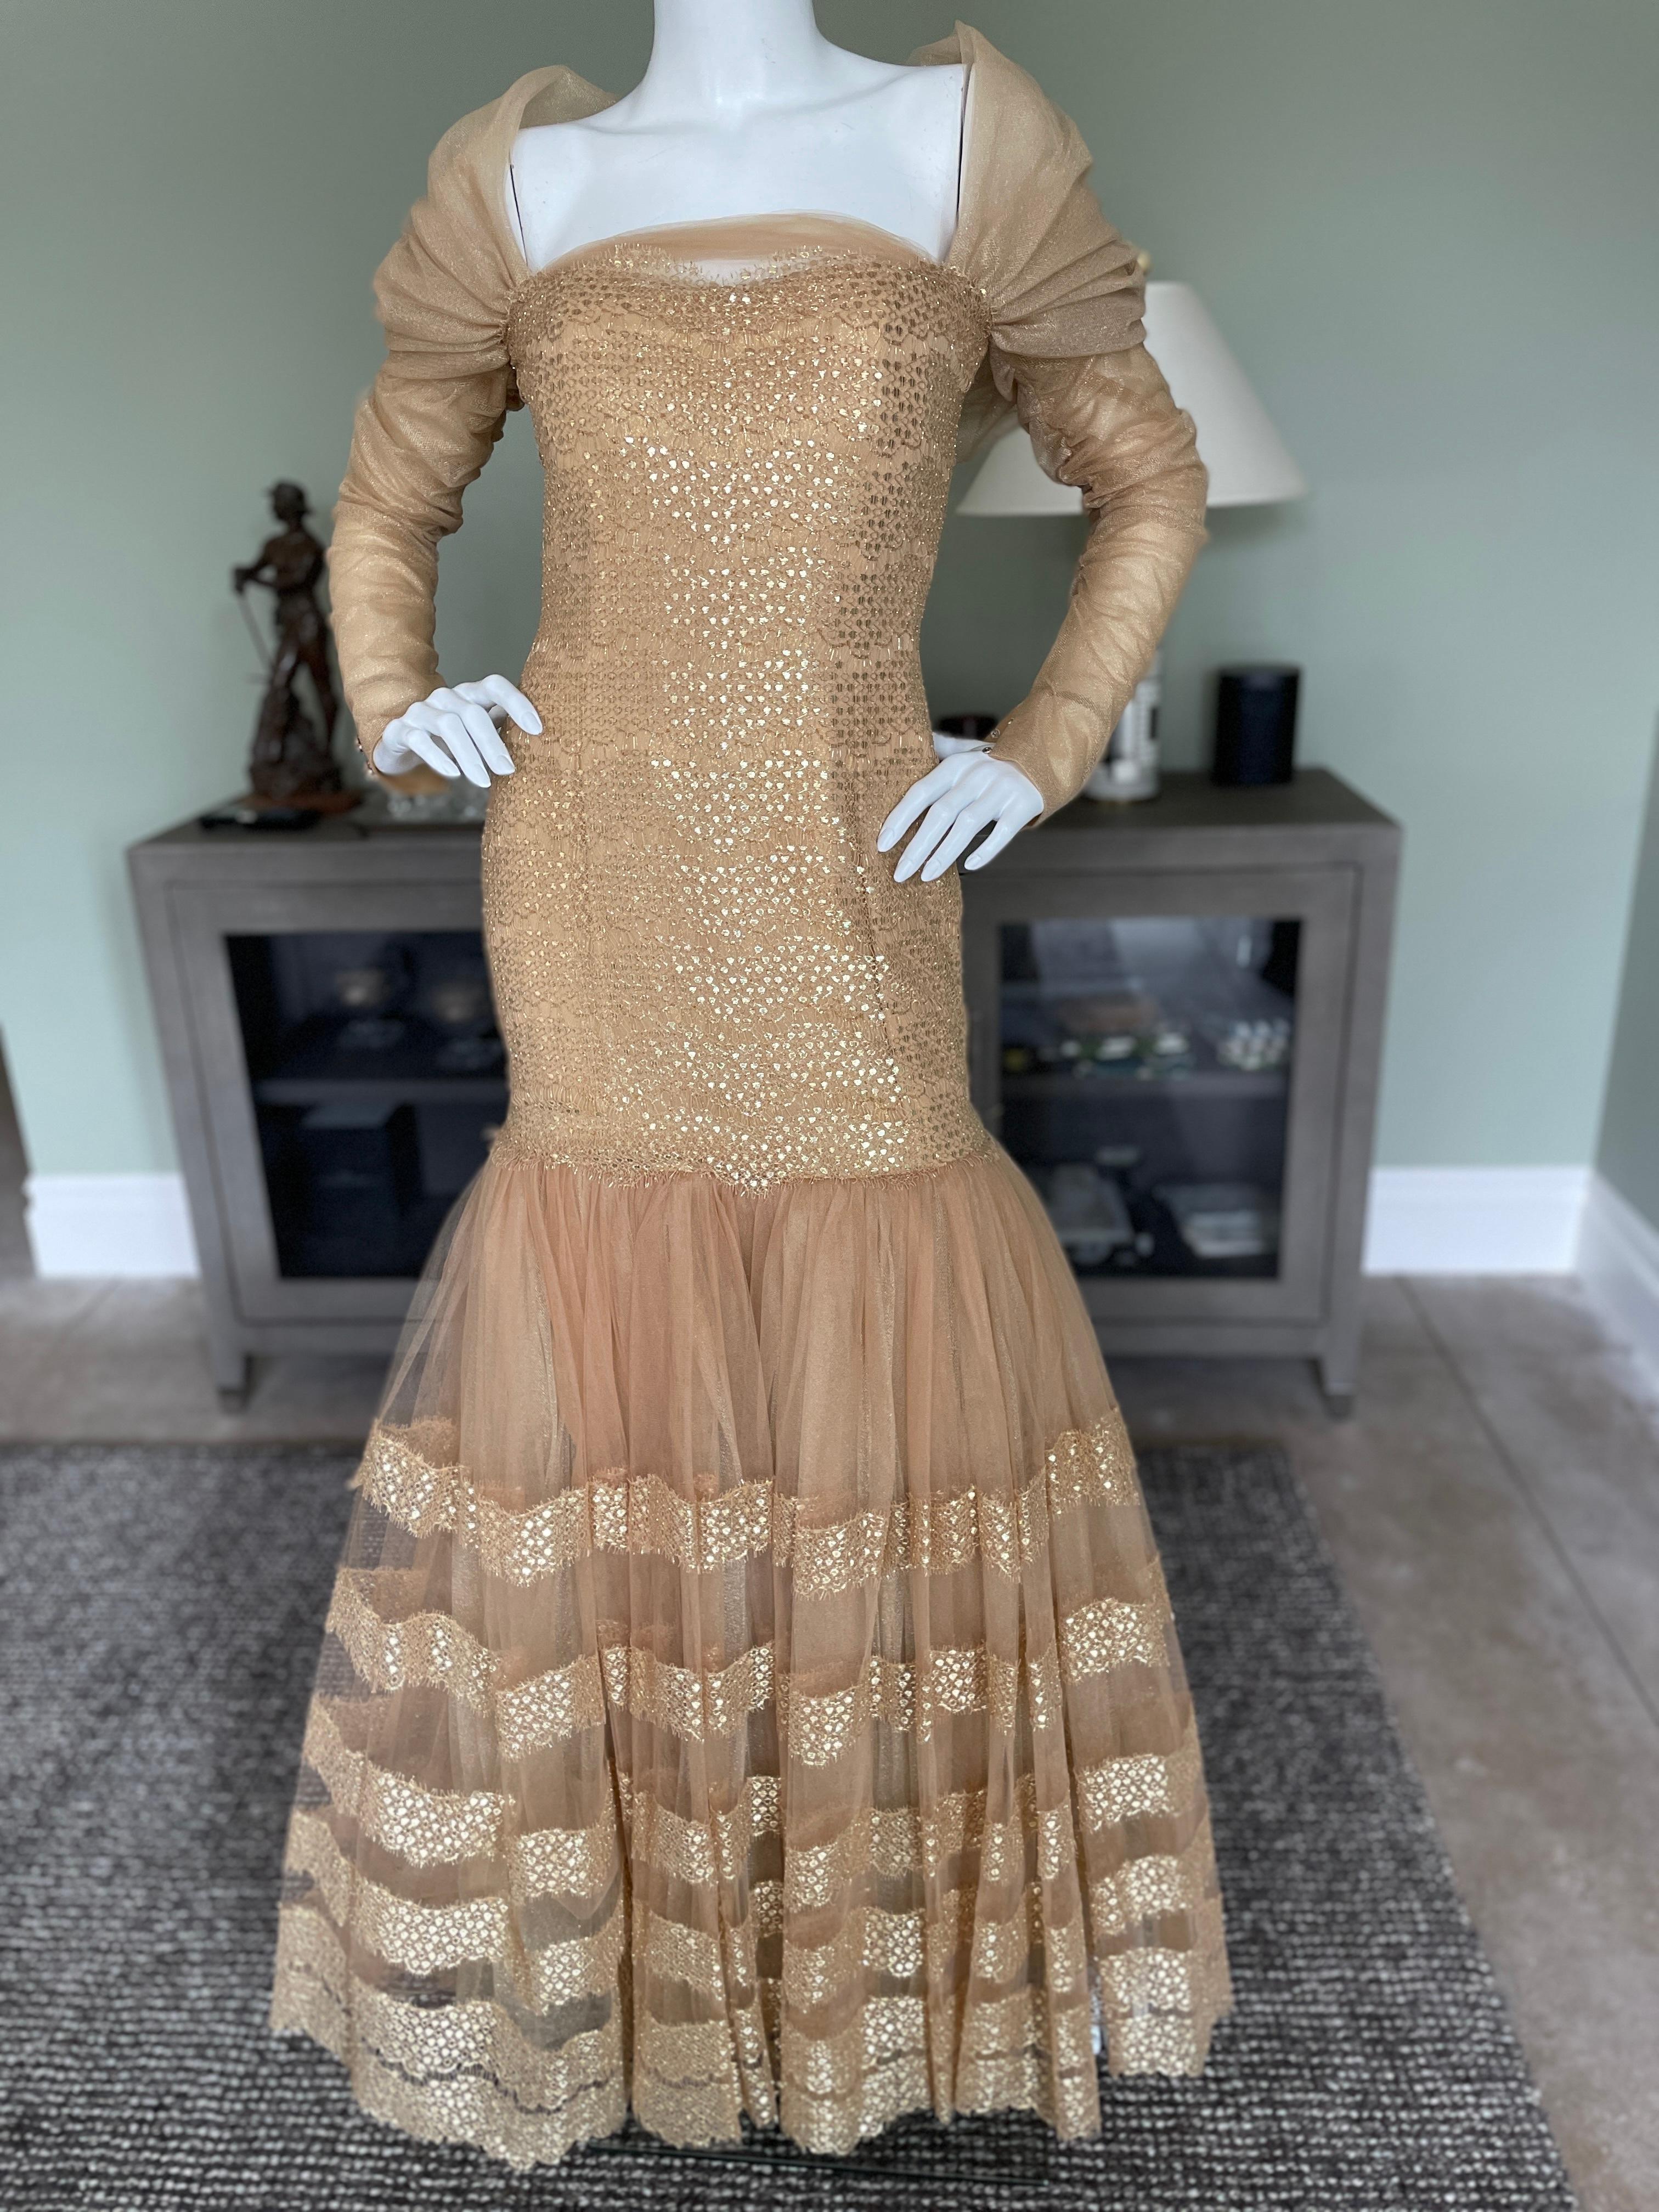 Michael Casey Couture 1980's Exquisite Gold Mermaid Ball Gown
So pretty, this has very wide mermaid flounce with yards of fabric, shimmers and shines when you walk.
Great entrance maker.
Provenance ; Charlotte Shultz , wife of former US Secretary of